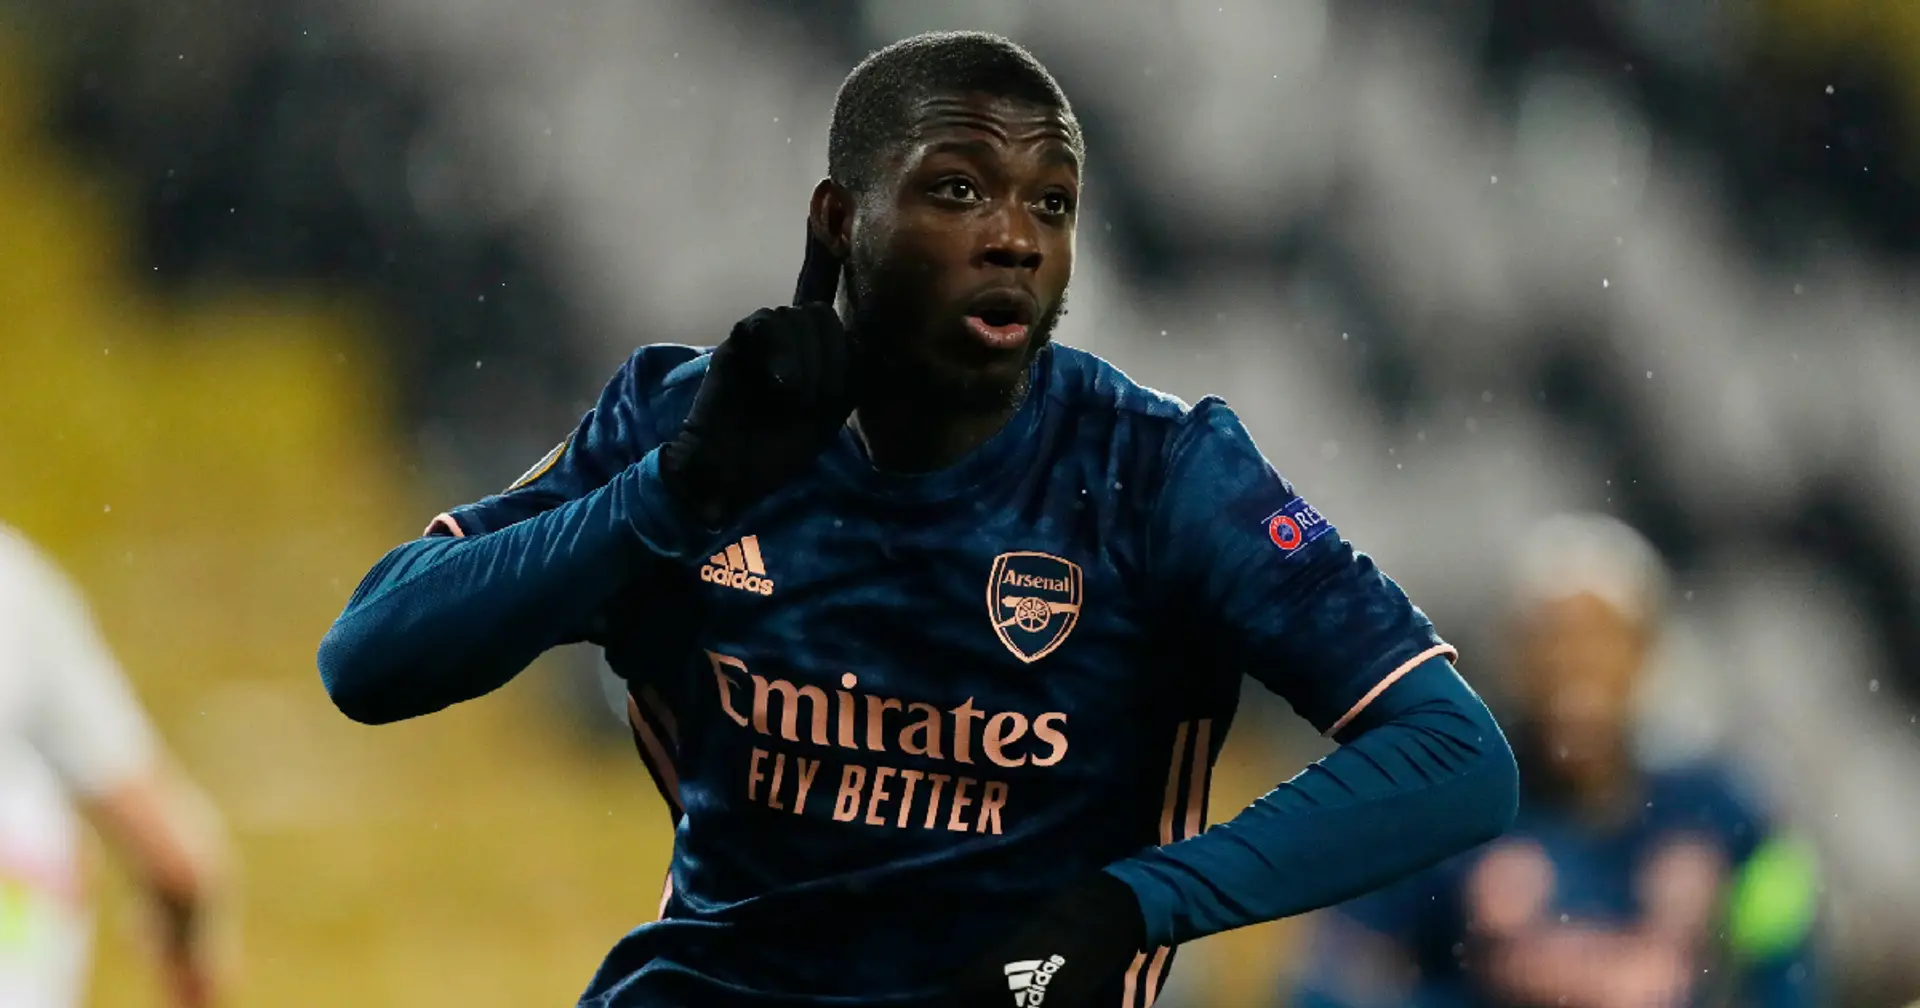 'Deals with haters the right way': Arsenal fans love Nicolas Pepe's goal in Slavia demolition